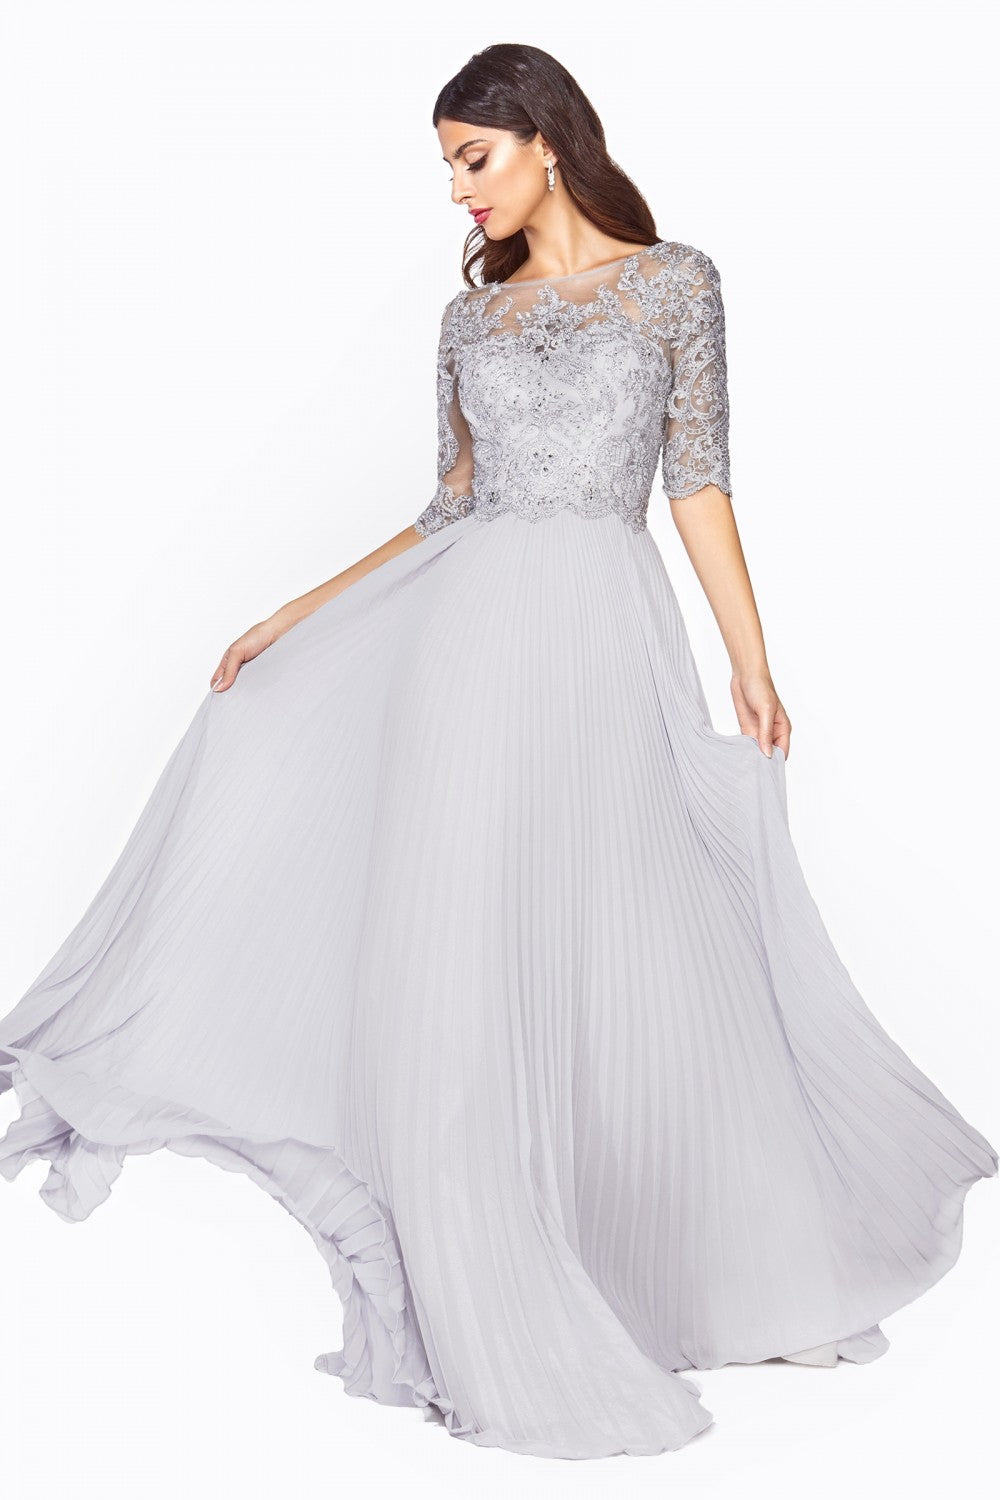 A-line dress with pleated chiffon skirt and lace three-quarter sleeve bodice. CDHT090 Elsy Style All Dresses